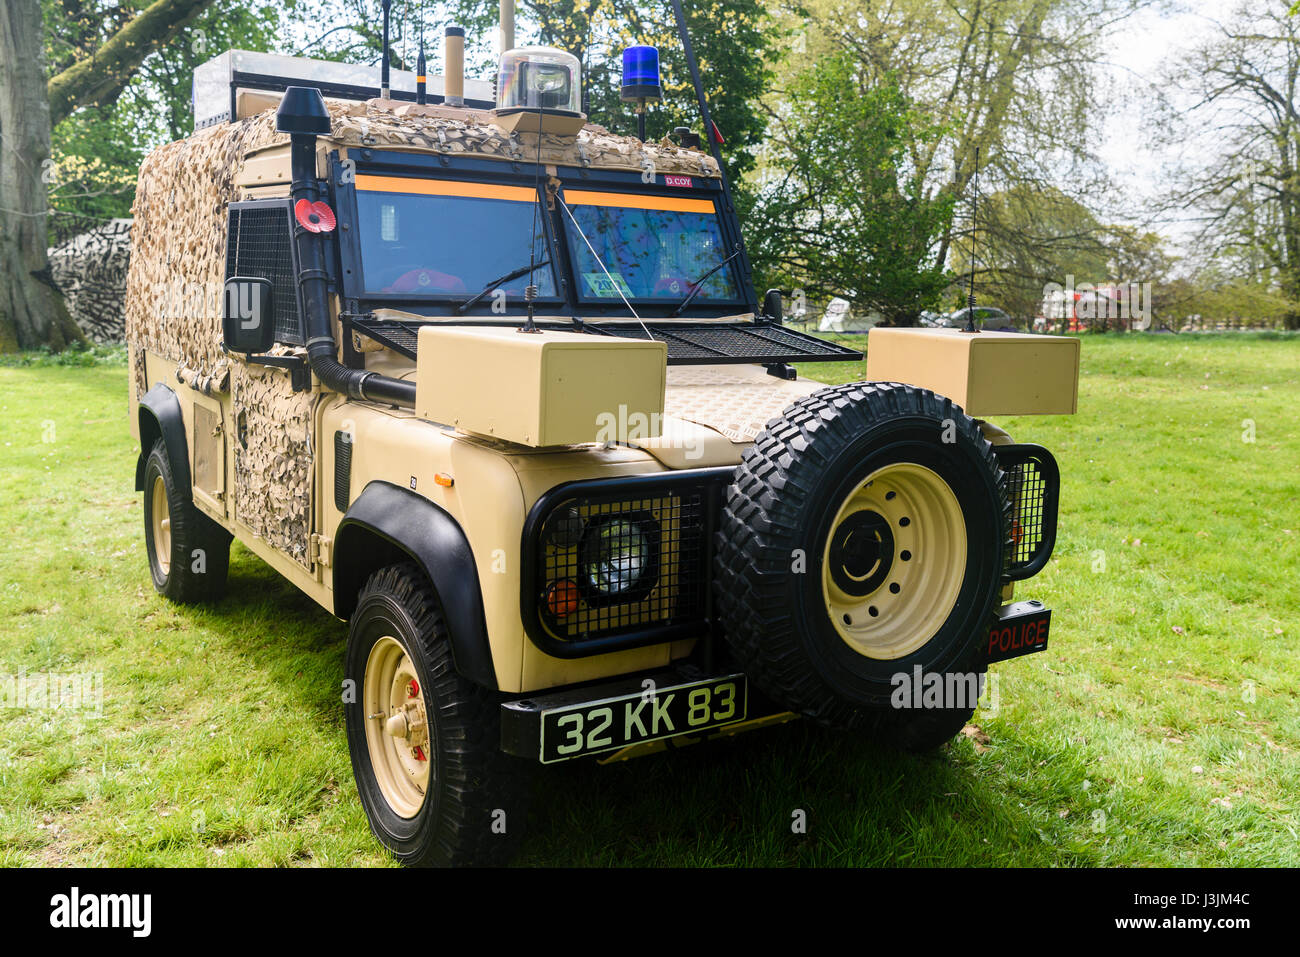 British army military police landrover with desert camouflage. Stock Photo